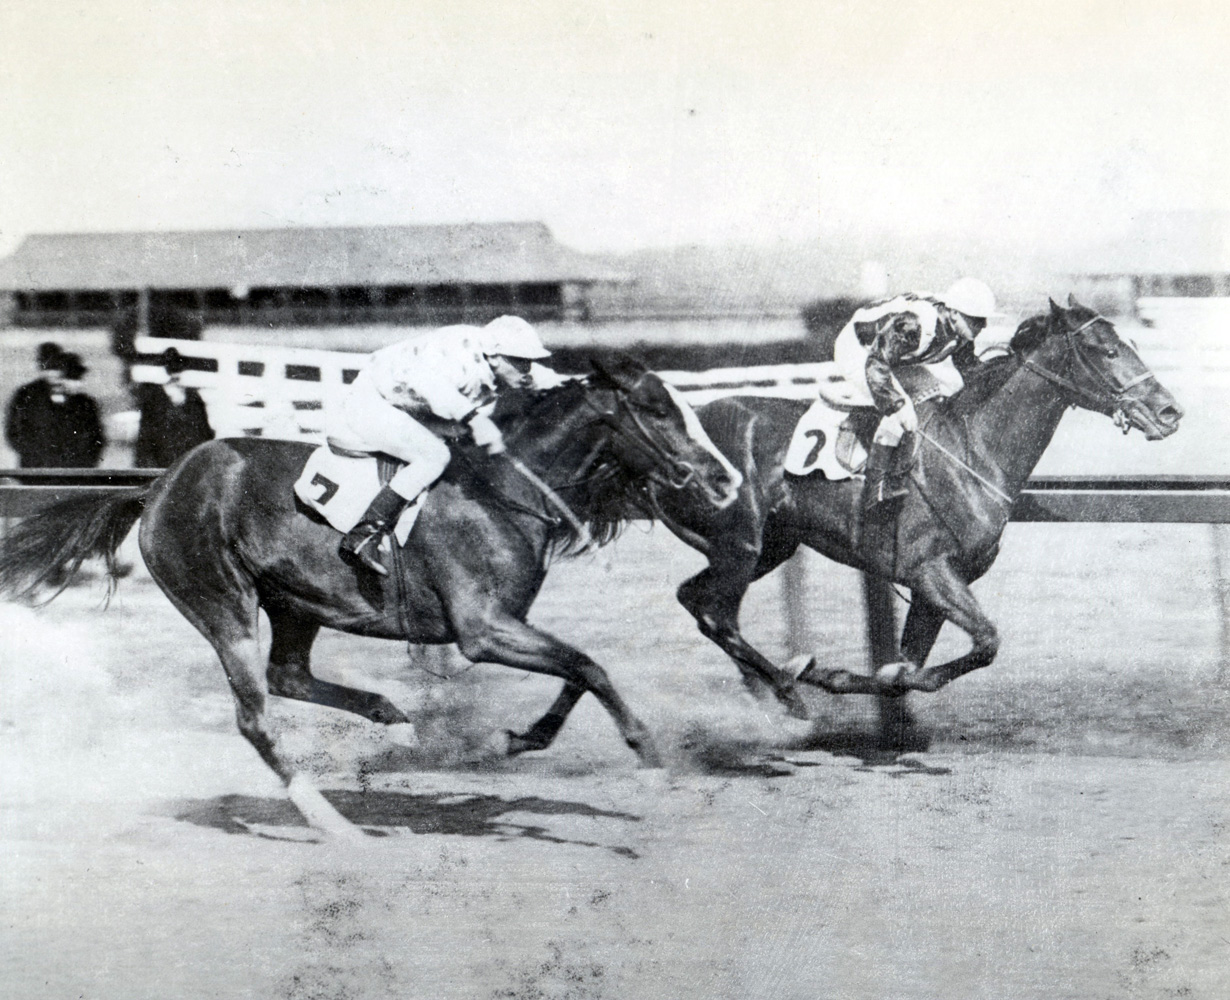 Walter Miller and Frizette winning a race at Aqueduct (Museum Collection)